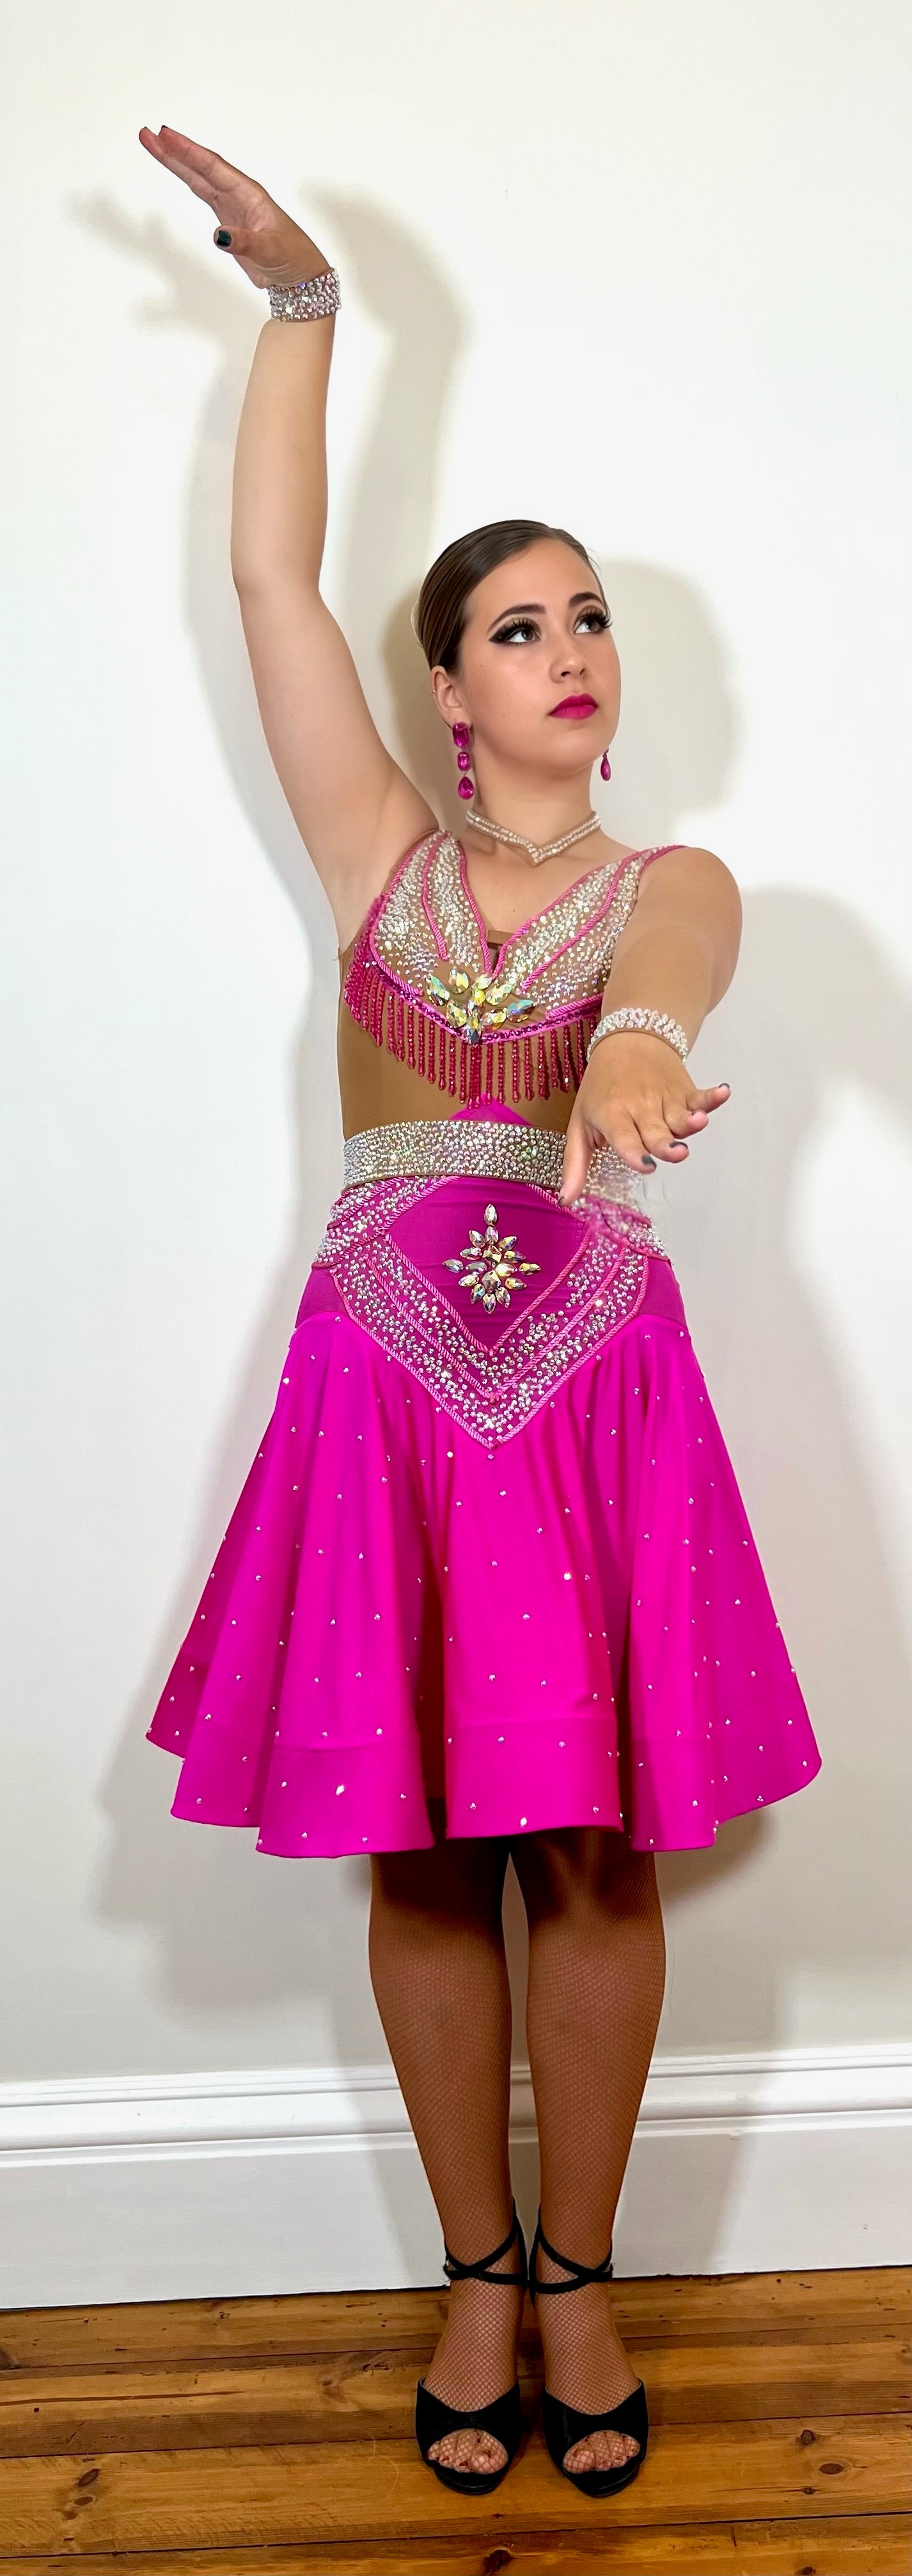 213 Cerise Pink & Tan Full skirted Latin dress with cerise bead dropper trim. Decorated with AB stones